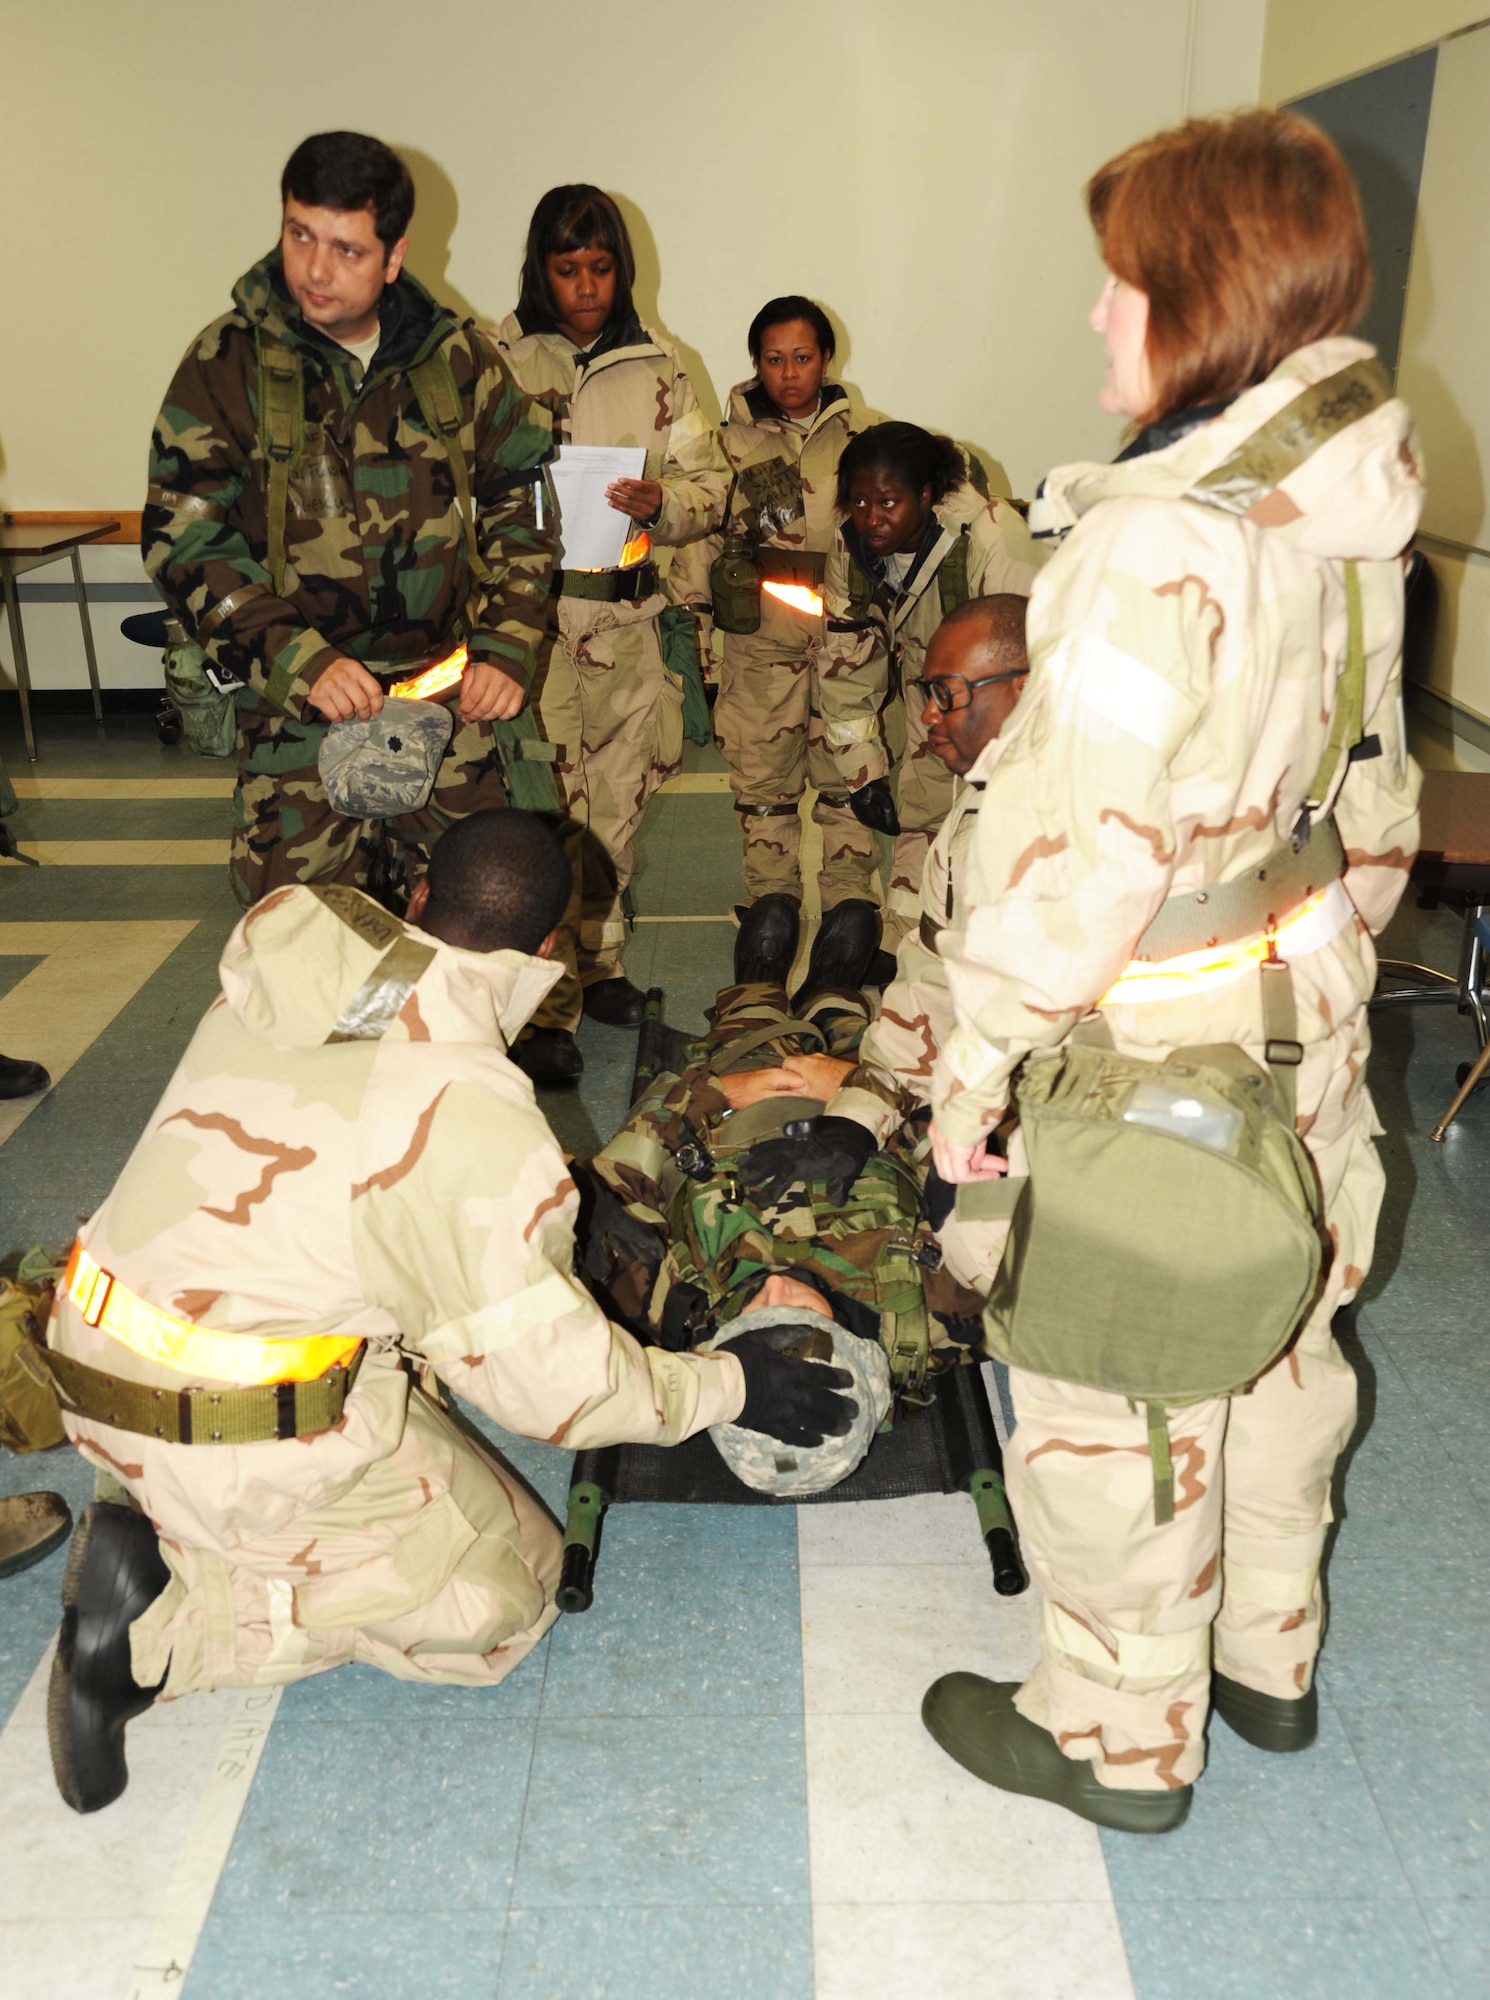 Lt. Col. Florin Georgescu, team leader for the 622nd ASTS, directs team members to start the assessment to the injured Airman. Critical assessments and application of life-saving procedures saved the Airman's life, and after a short stay at the medical center the Airman returned to his duty station. Simulations like this are part of the training scenarios that will prepare the 622nd and other units here at Volk Field for an upcoming Operational Readiness Inspection. (Air Force photo by Jerry Green)